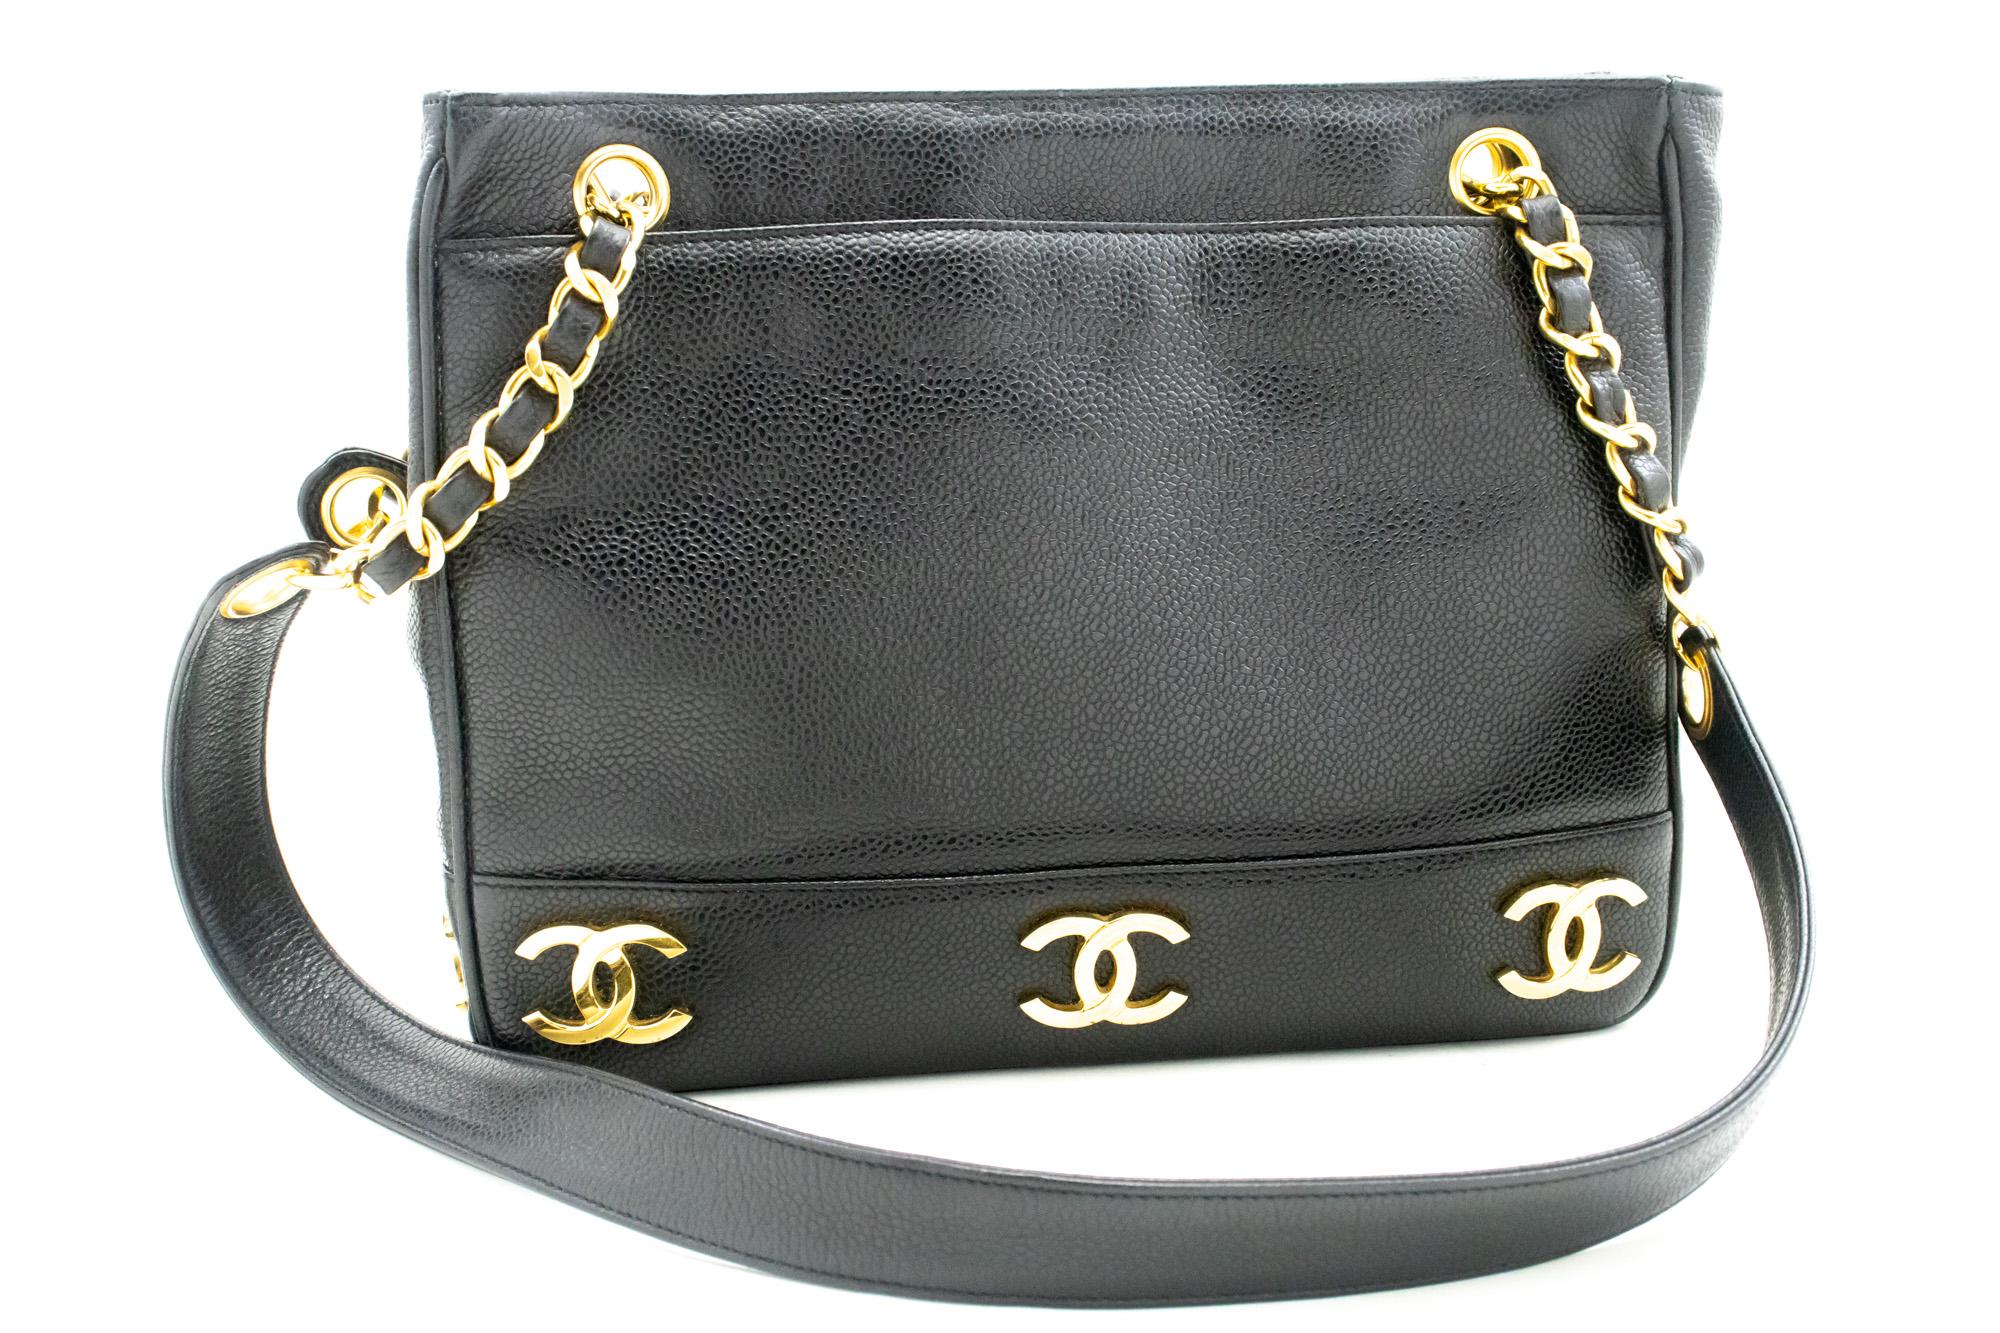 An authentic CHANEL Caviar Triple Coco Chain Shoulder Bag Black Leather Gold. The color is Black. The outside material is Leather. The pattern is Solid. This item is Vintage / Classic. The year of manufacture would be 1991-1994.
Conditions &